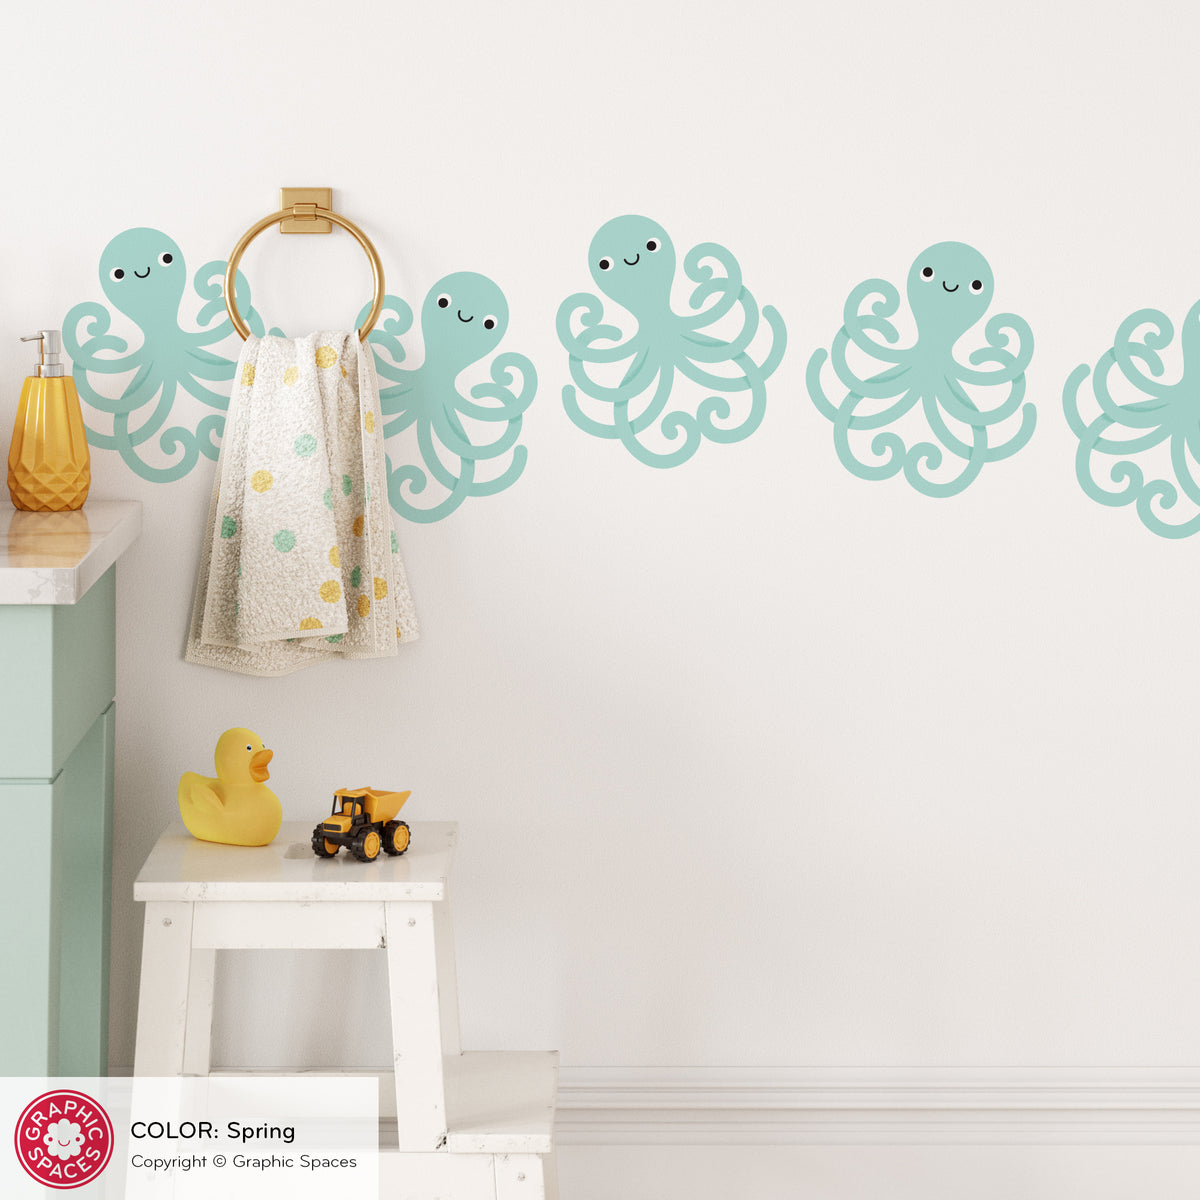 Octopus Scatter Fabric Wall Decals - Pack of 10